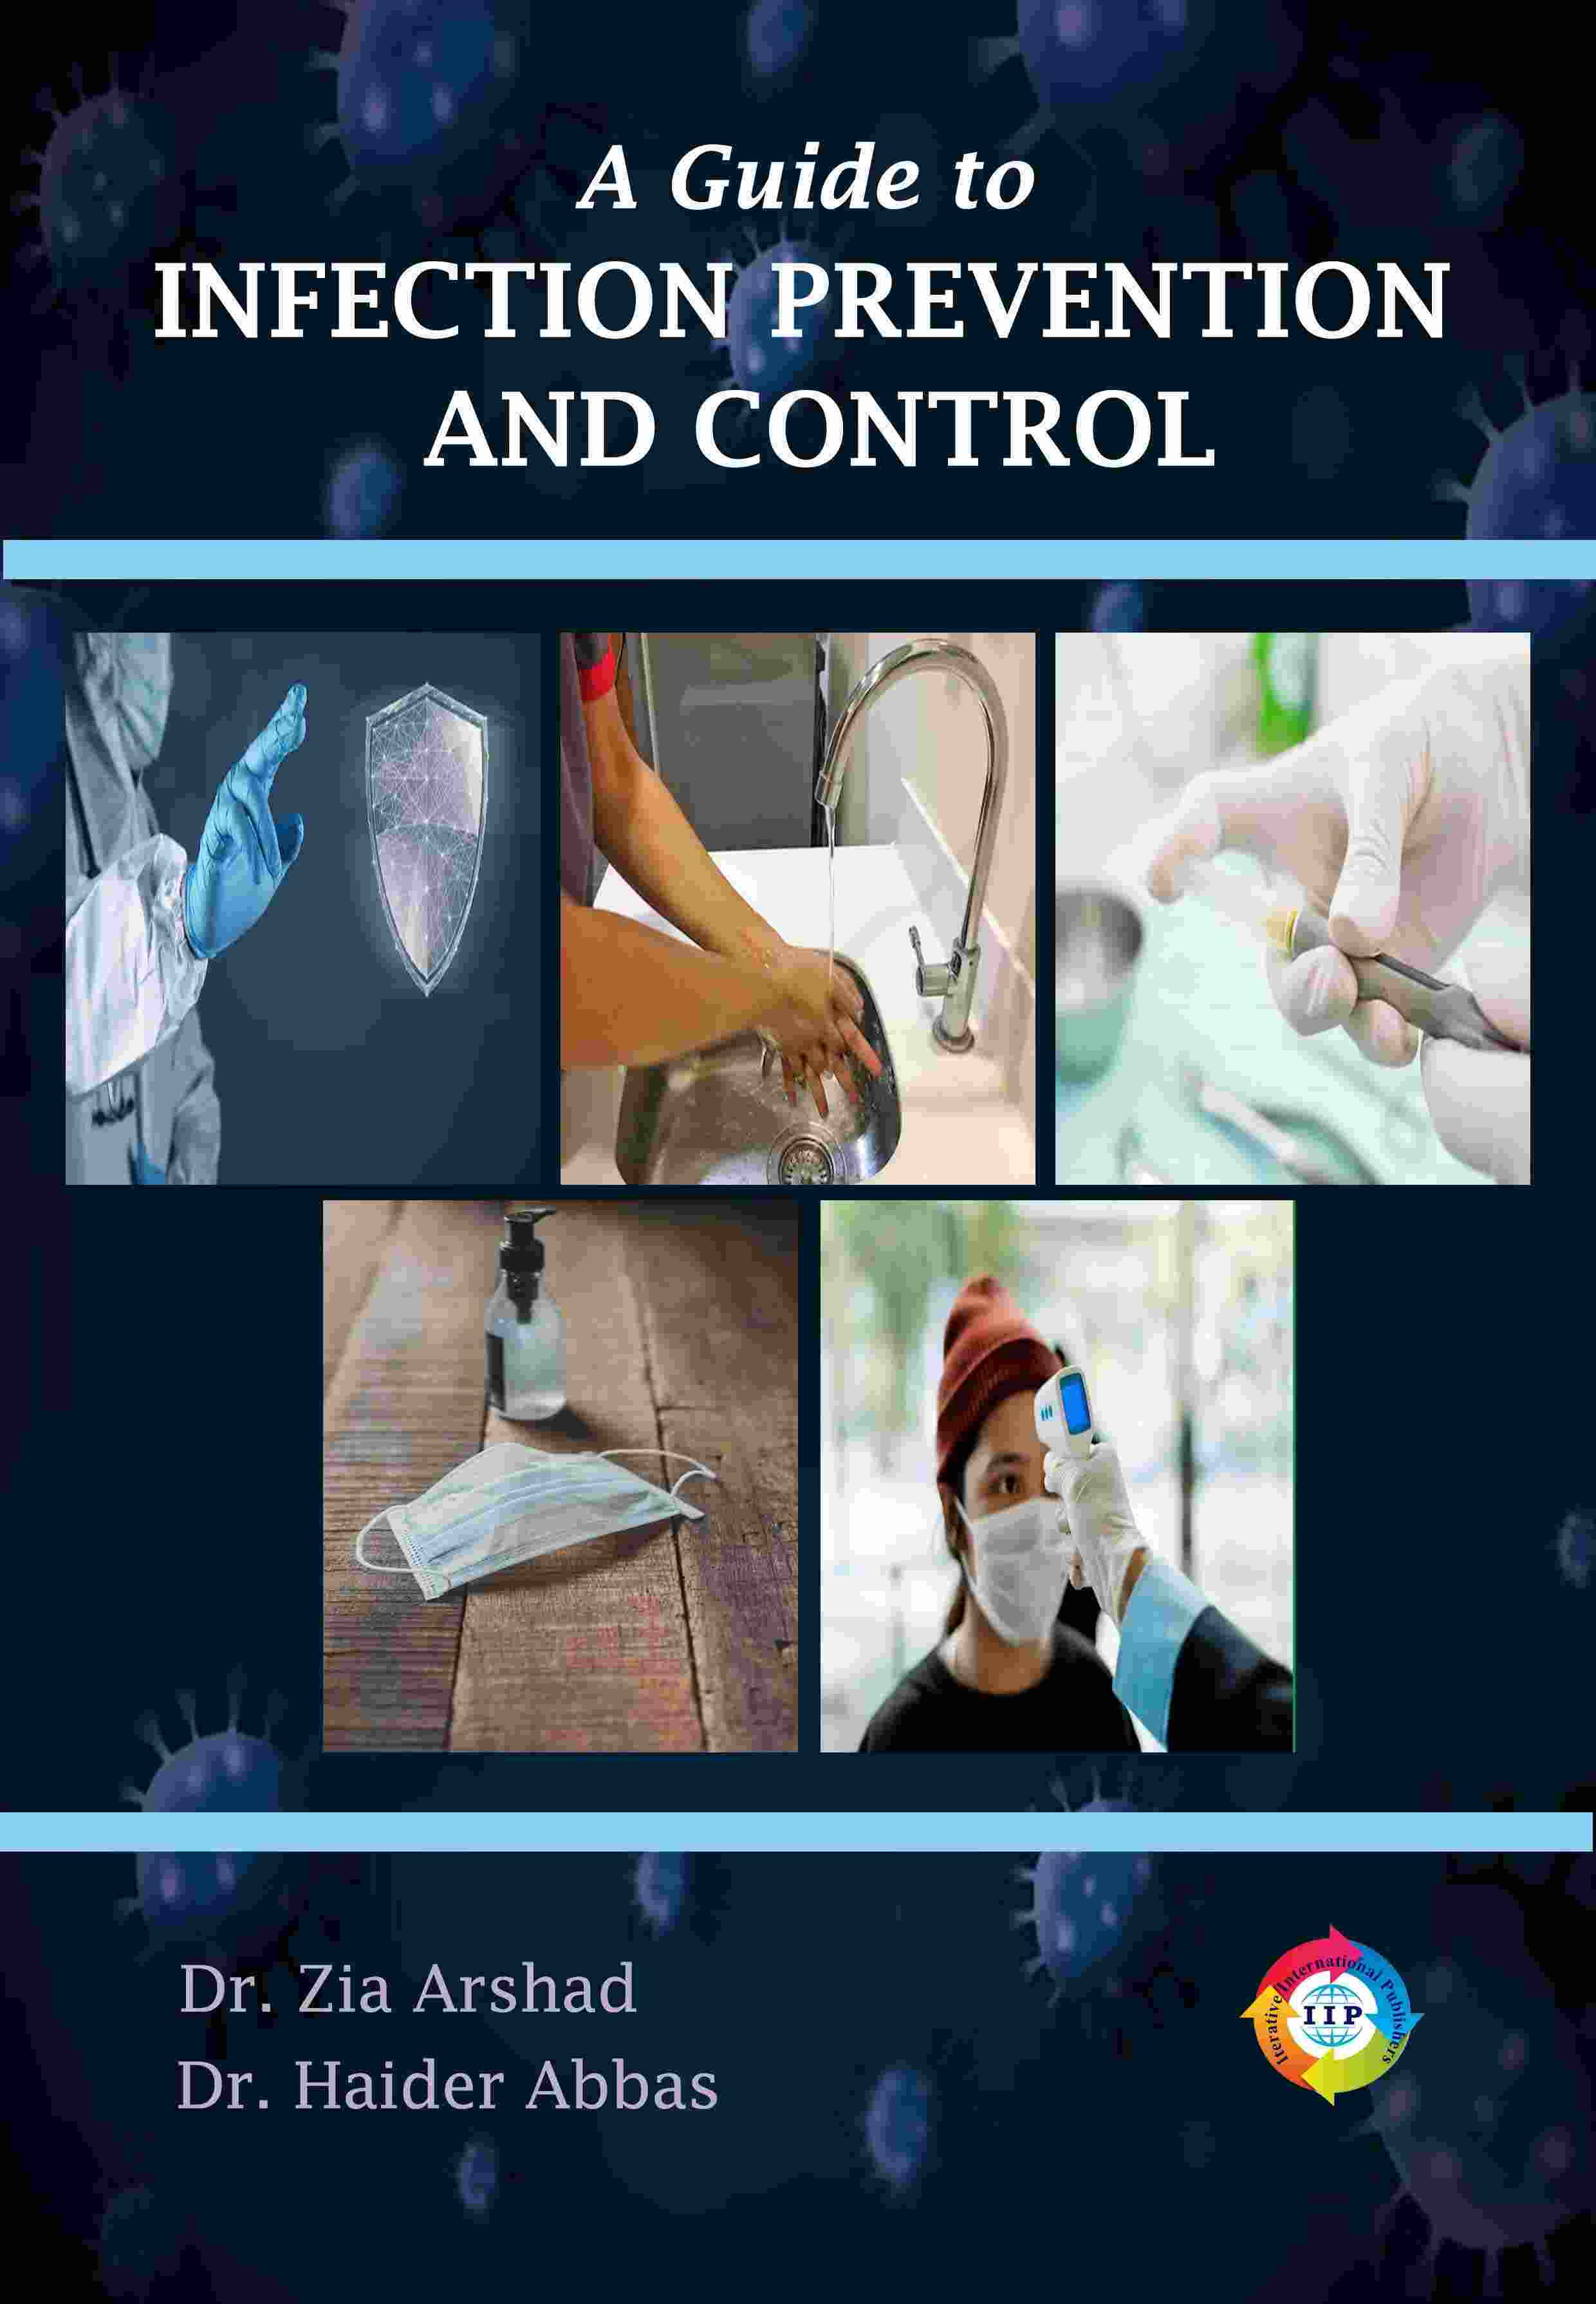 A GUIDE TO INFECTION PREVENTION AND CONTROL